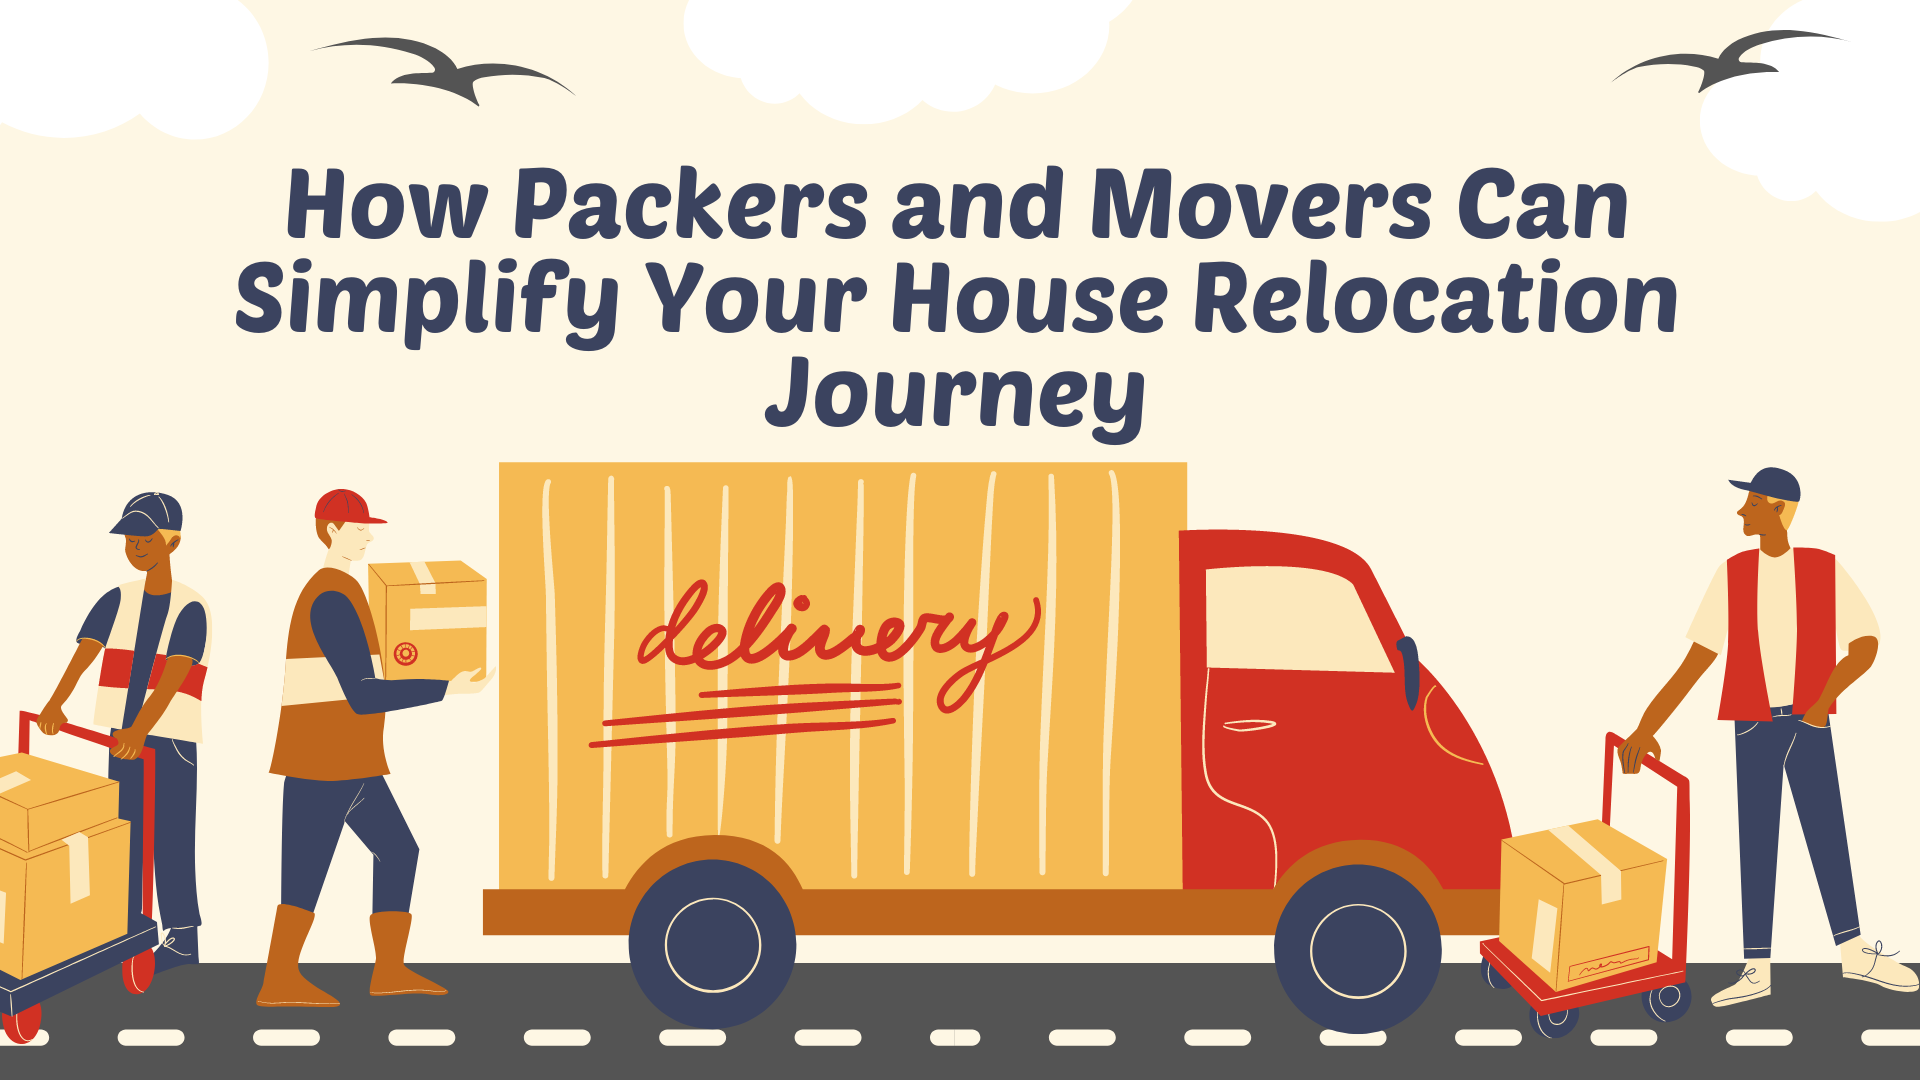 How Packers and Movers Can Simplify Your House Relocation Journey